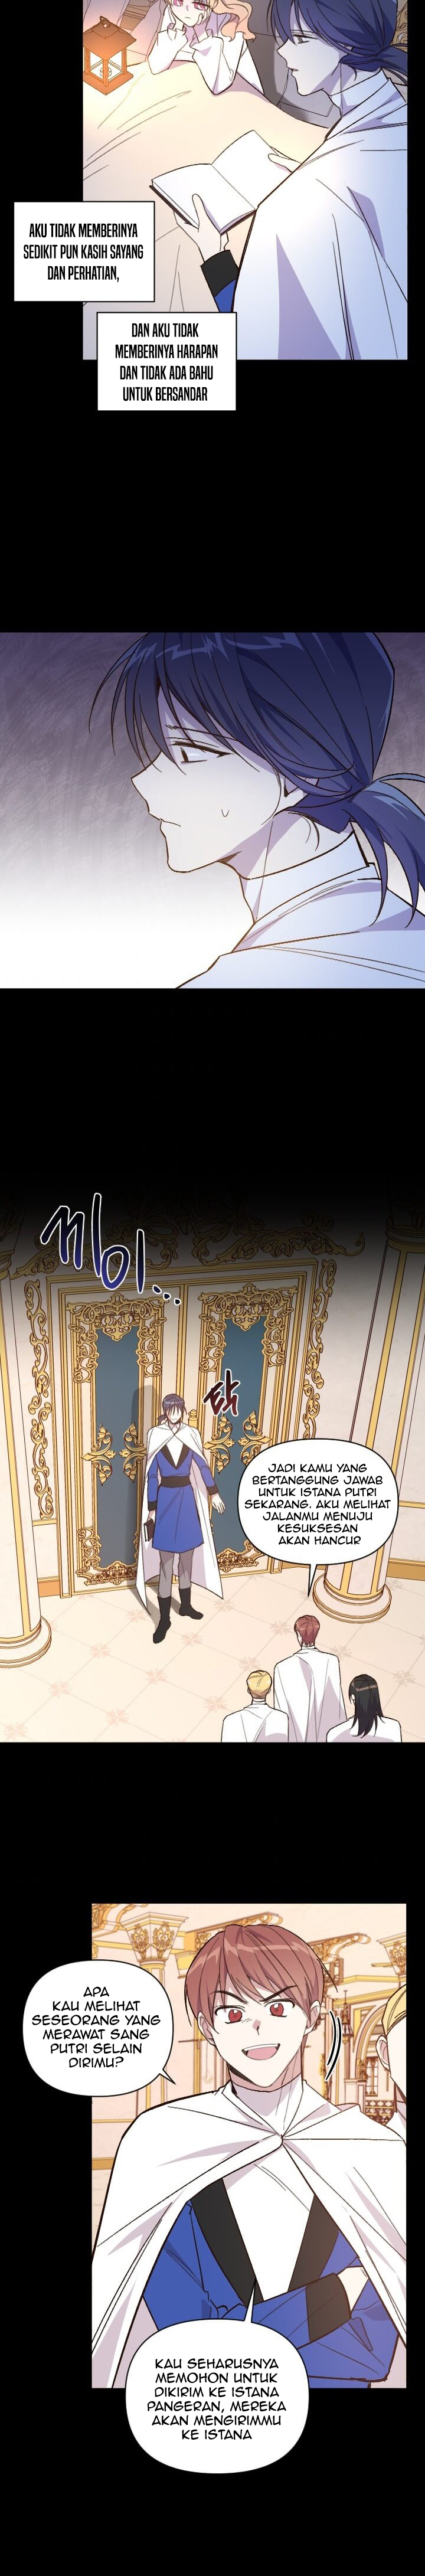 Asirhart Kingdom Aide Chapter 47